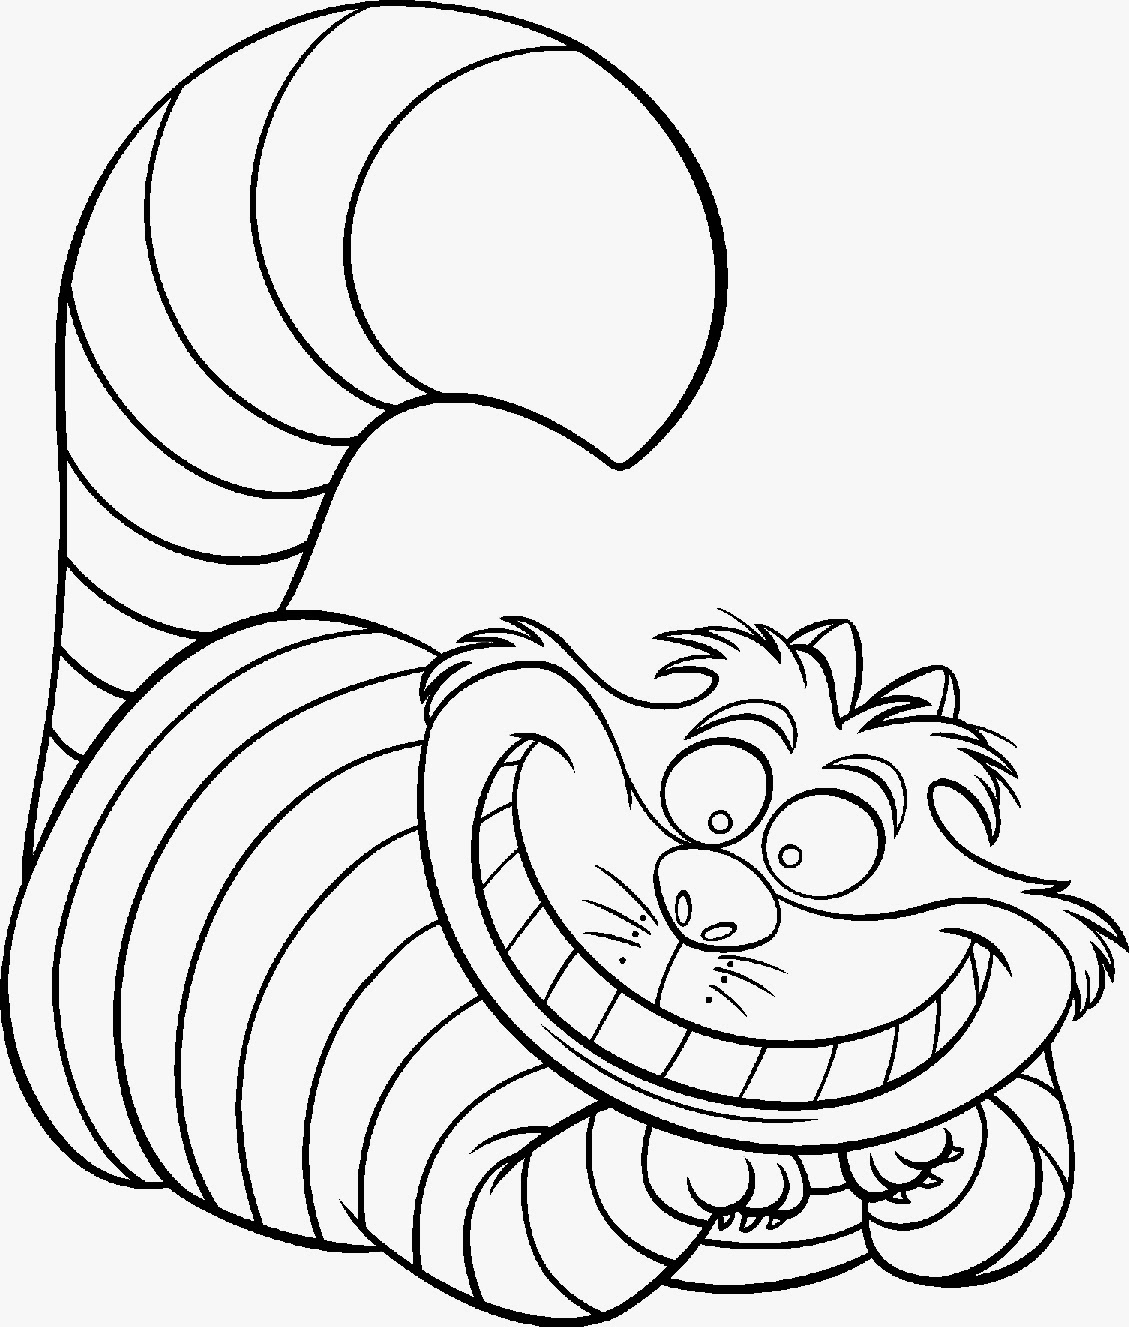 Printable Coloring Pages Coloring Wallpapers Download Free Images Wallpaper [coloring654.blogspot.com]